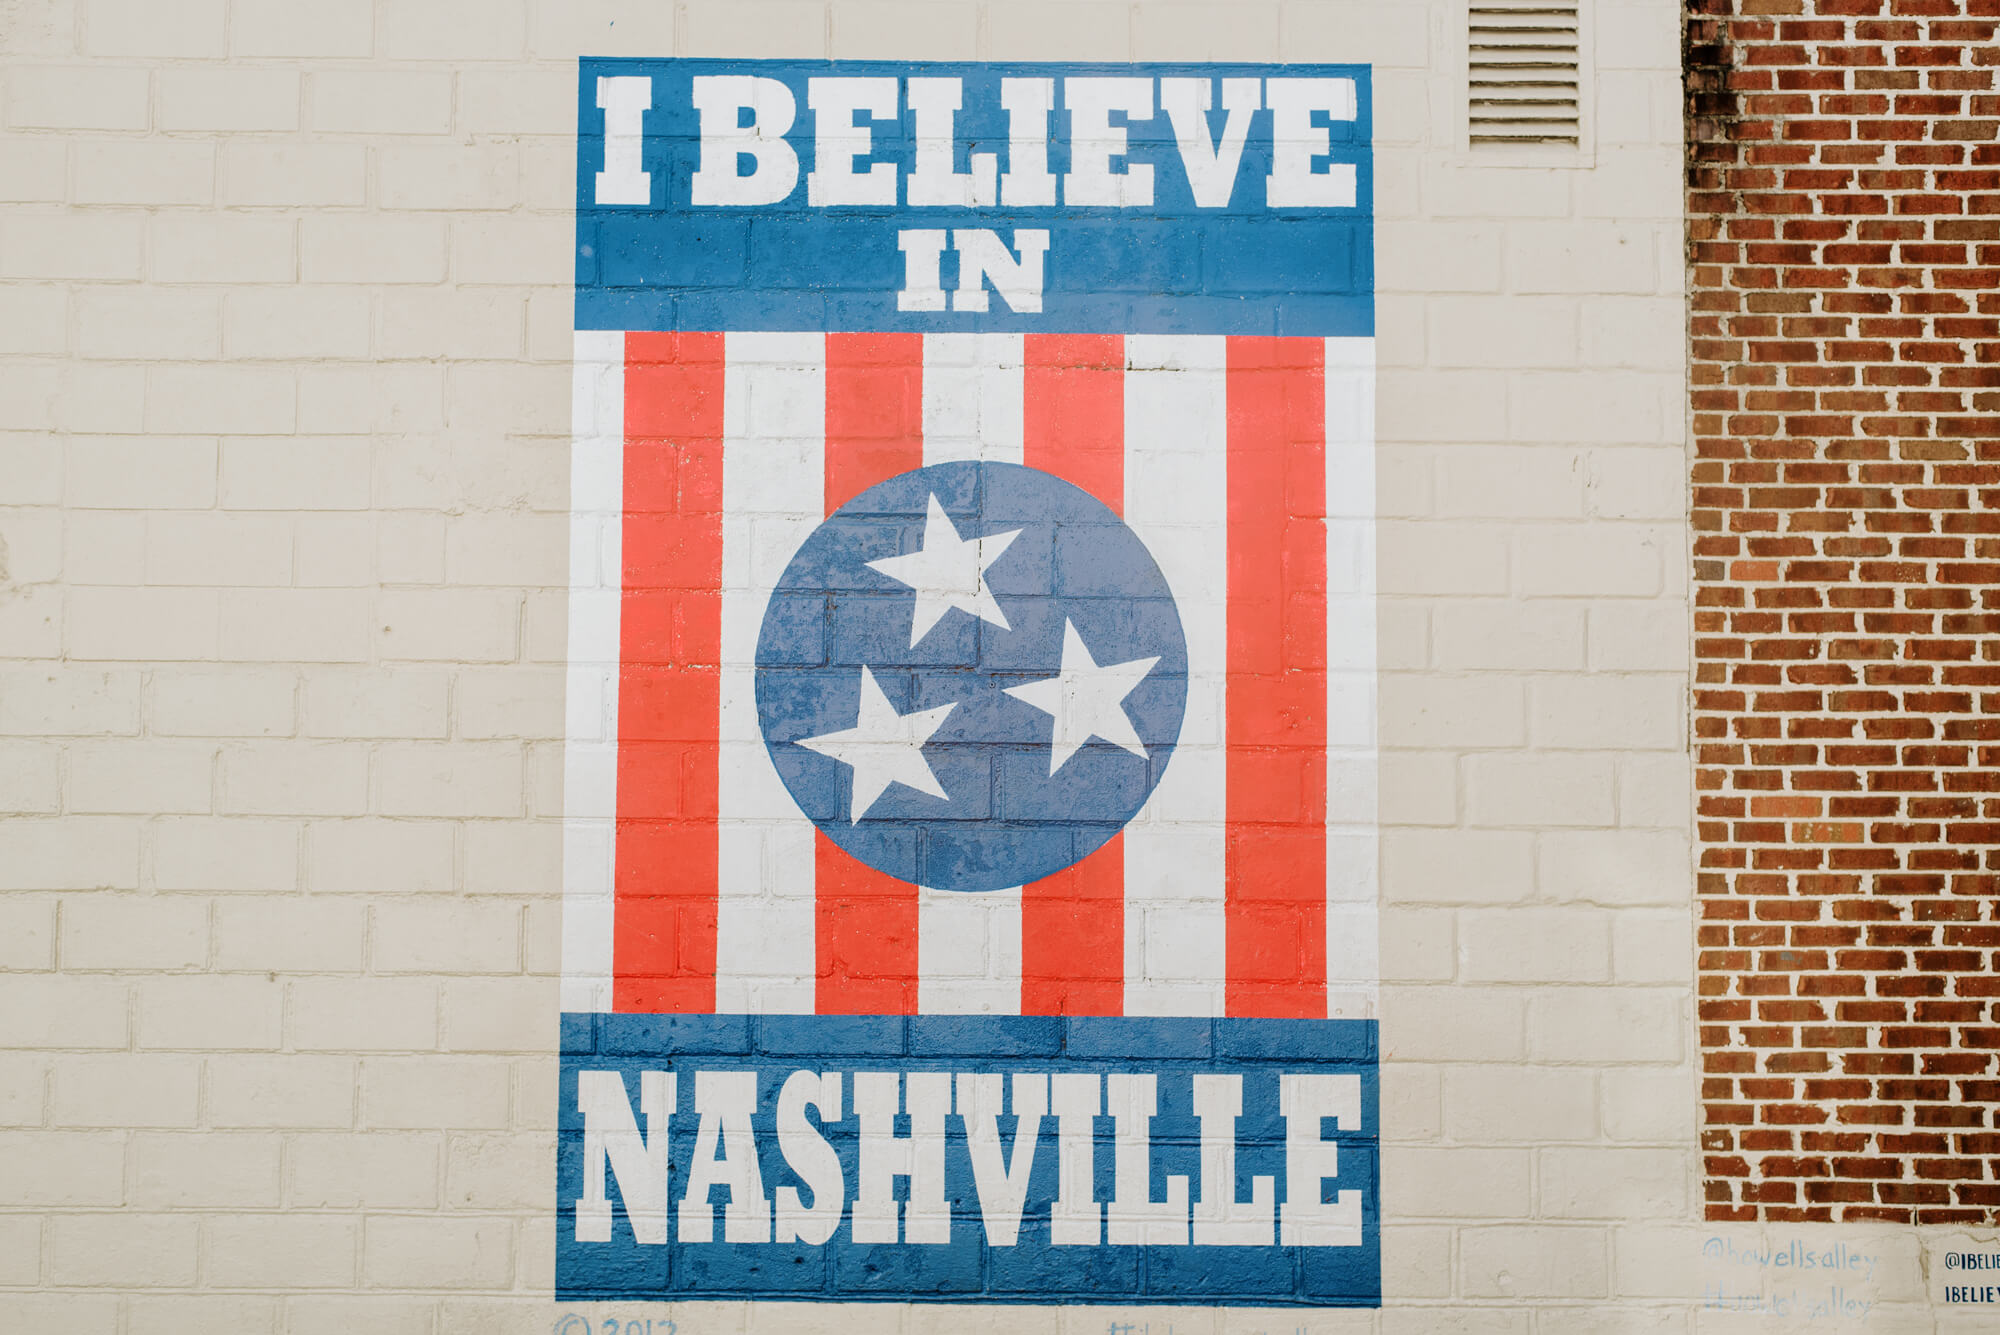 a vertical, rectangular mural painted on a white brick wall in Nashville's 12 South neighborhood. The mural is red, white, and blue with stripes and stars. It says "I believe in Nashville."